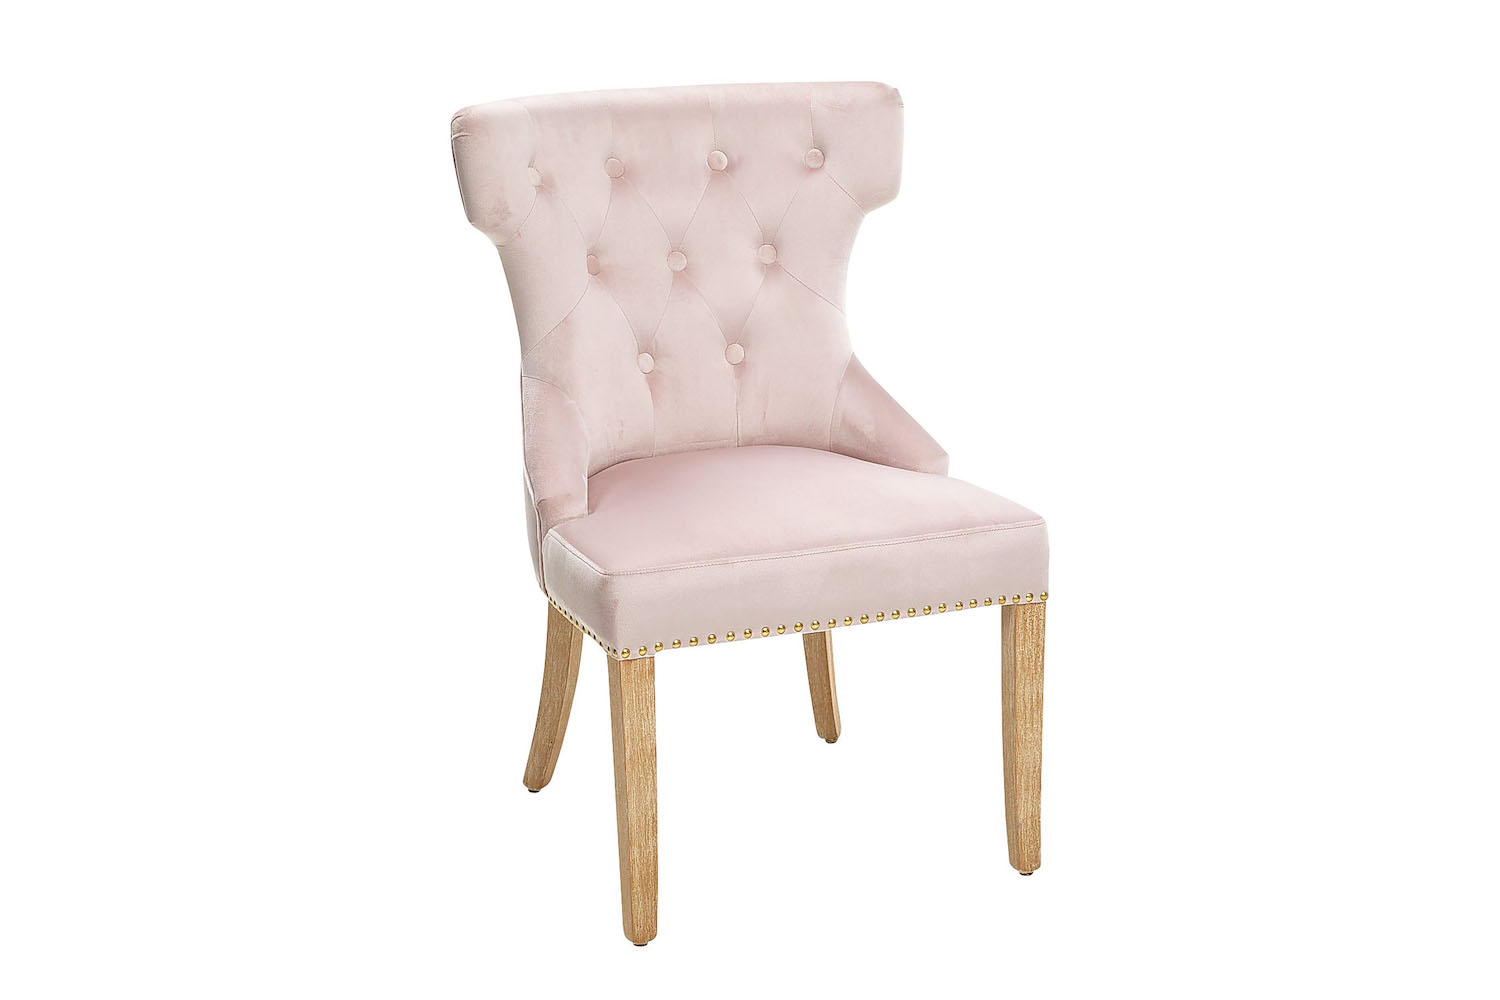 pier one hourglass chair